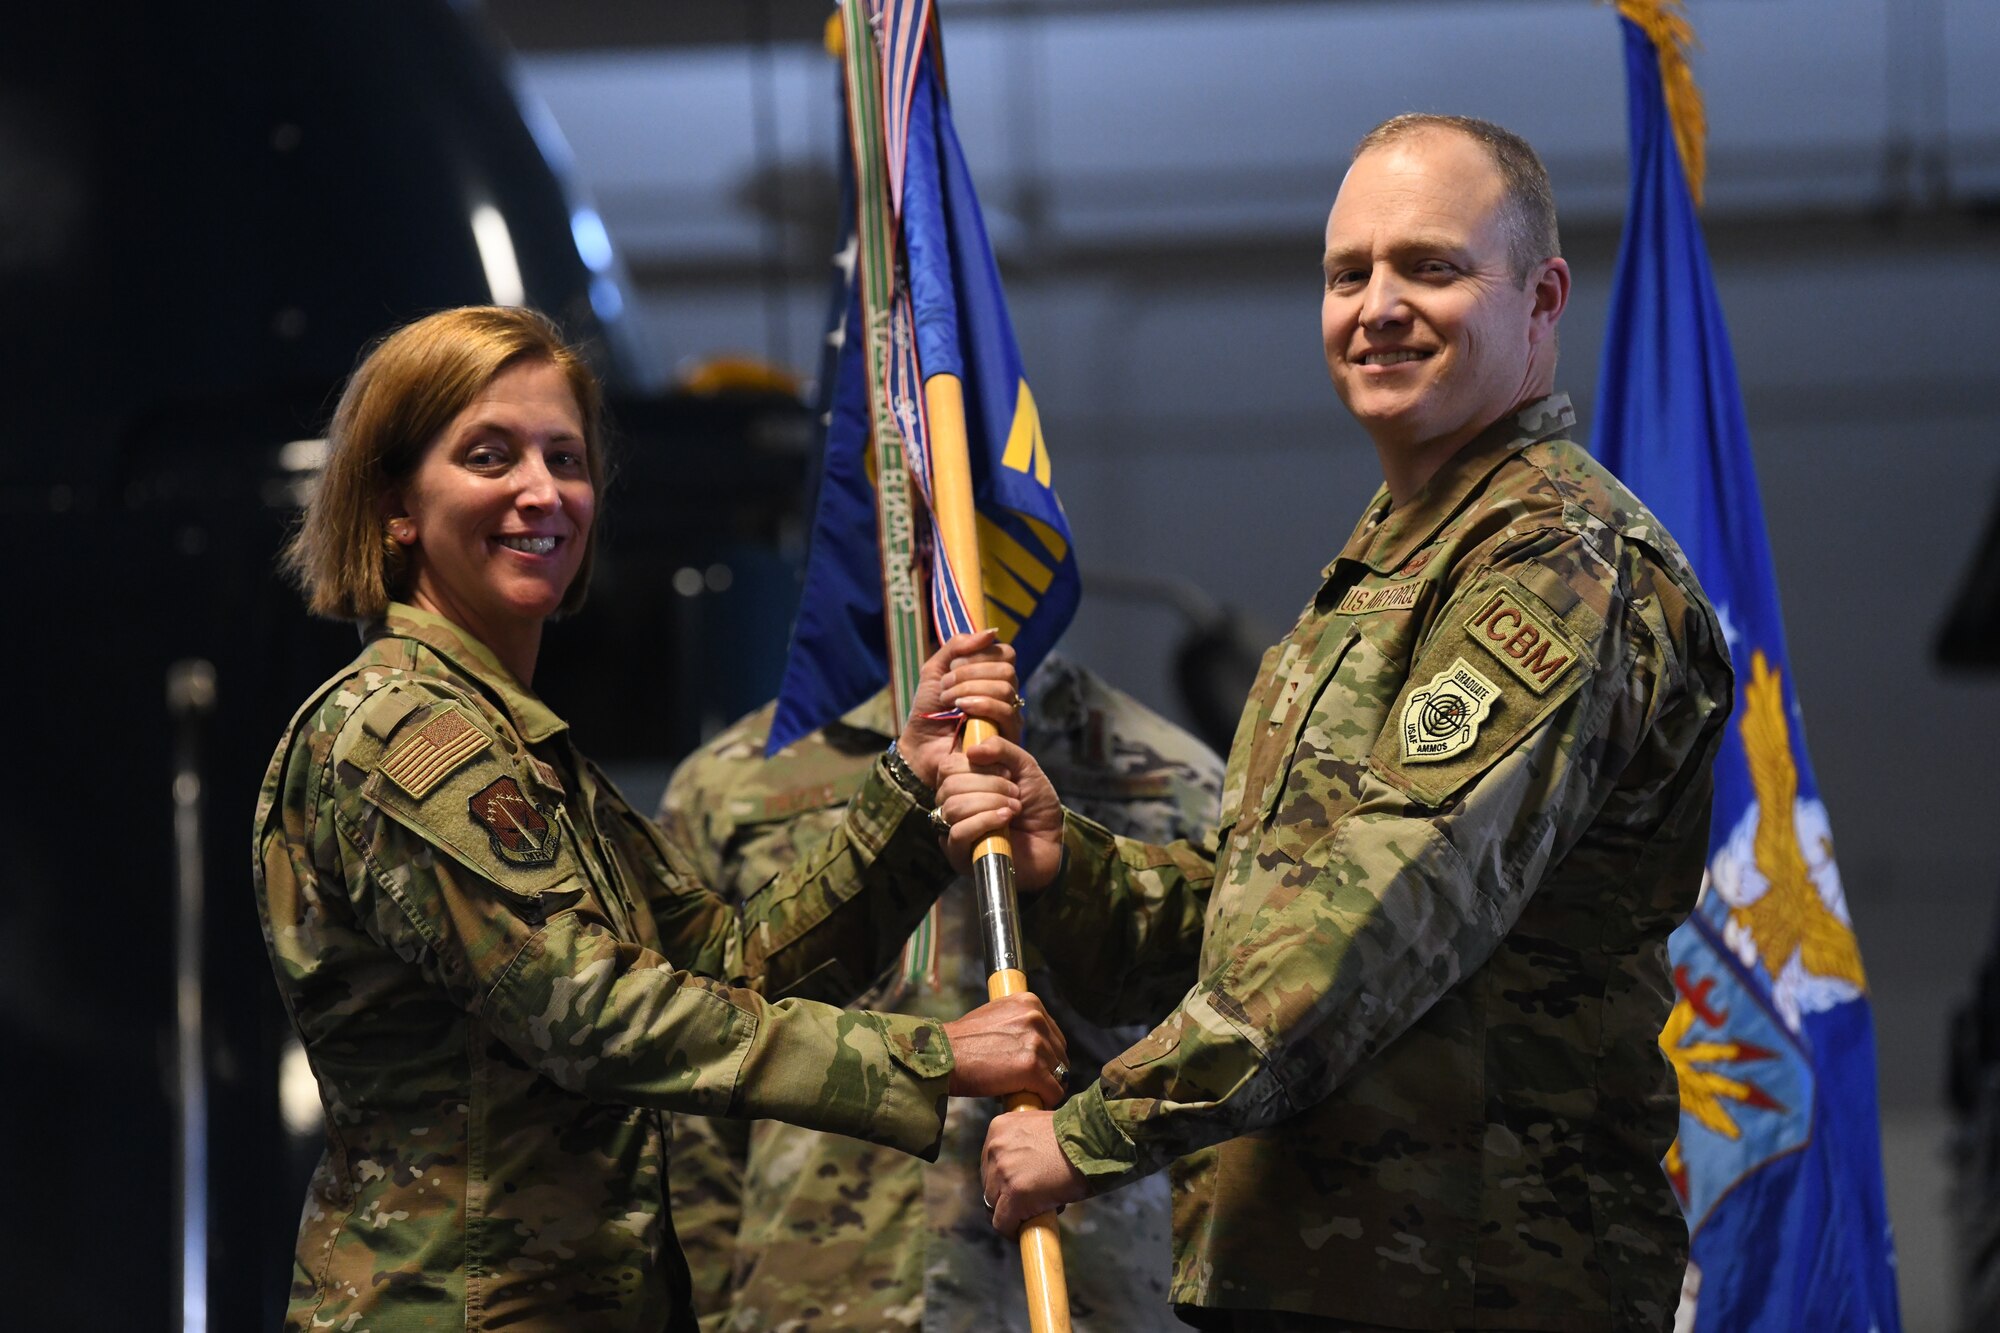 Col. Catherine Barrington, Commander of the 90th Missile Wing, passes the guidon to Col. Michael Power, the incoming commander of the 90th Maintenance Group, during the 90 MXG Change of Command Ceremony on F.E. Warren Air Force Base, Wyoming, on June 30, 2021. The change of command ceremony signifies the transition of command from Col. Brian Rico, the outgoing commander of 90 MXG, to Power. (U.S. Air Force photo by Airman 1st Class Frazier)